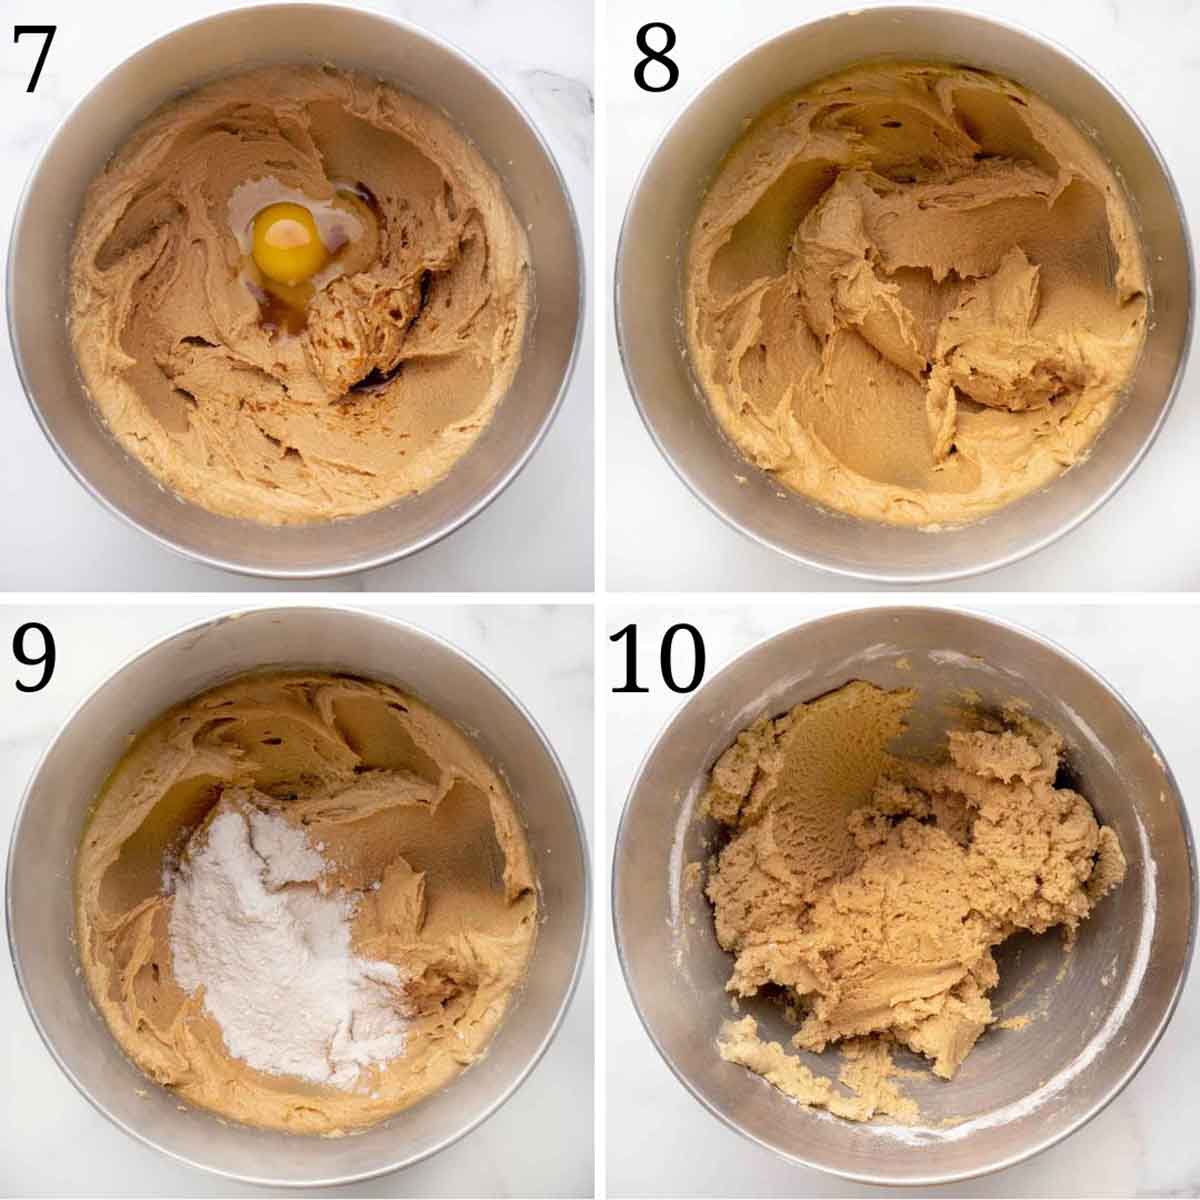 4 images showing how to finish making cookie dough